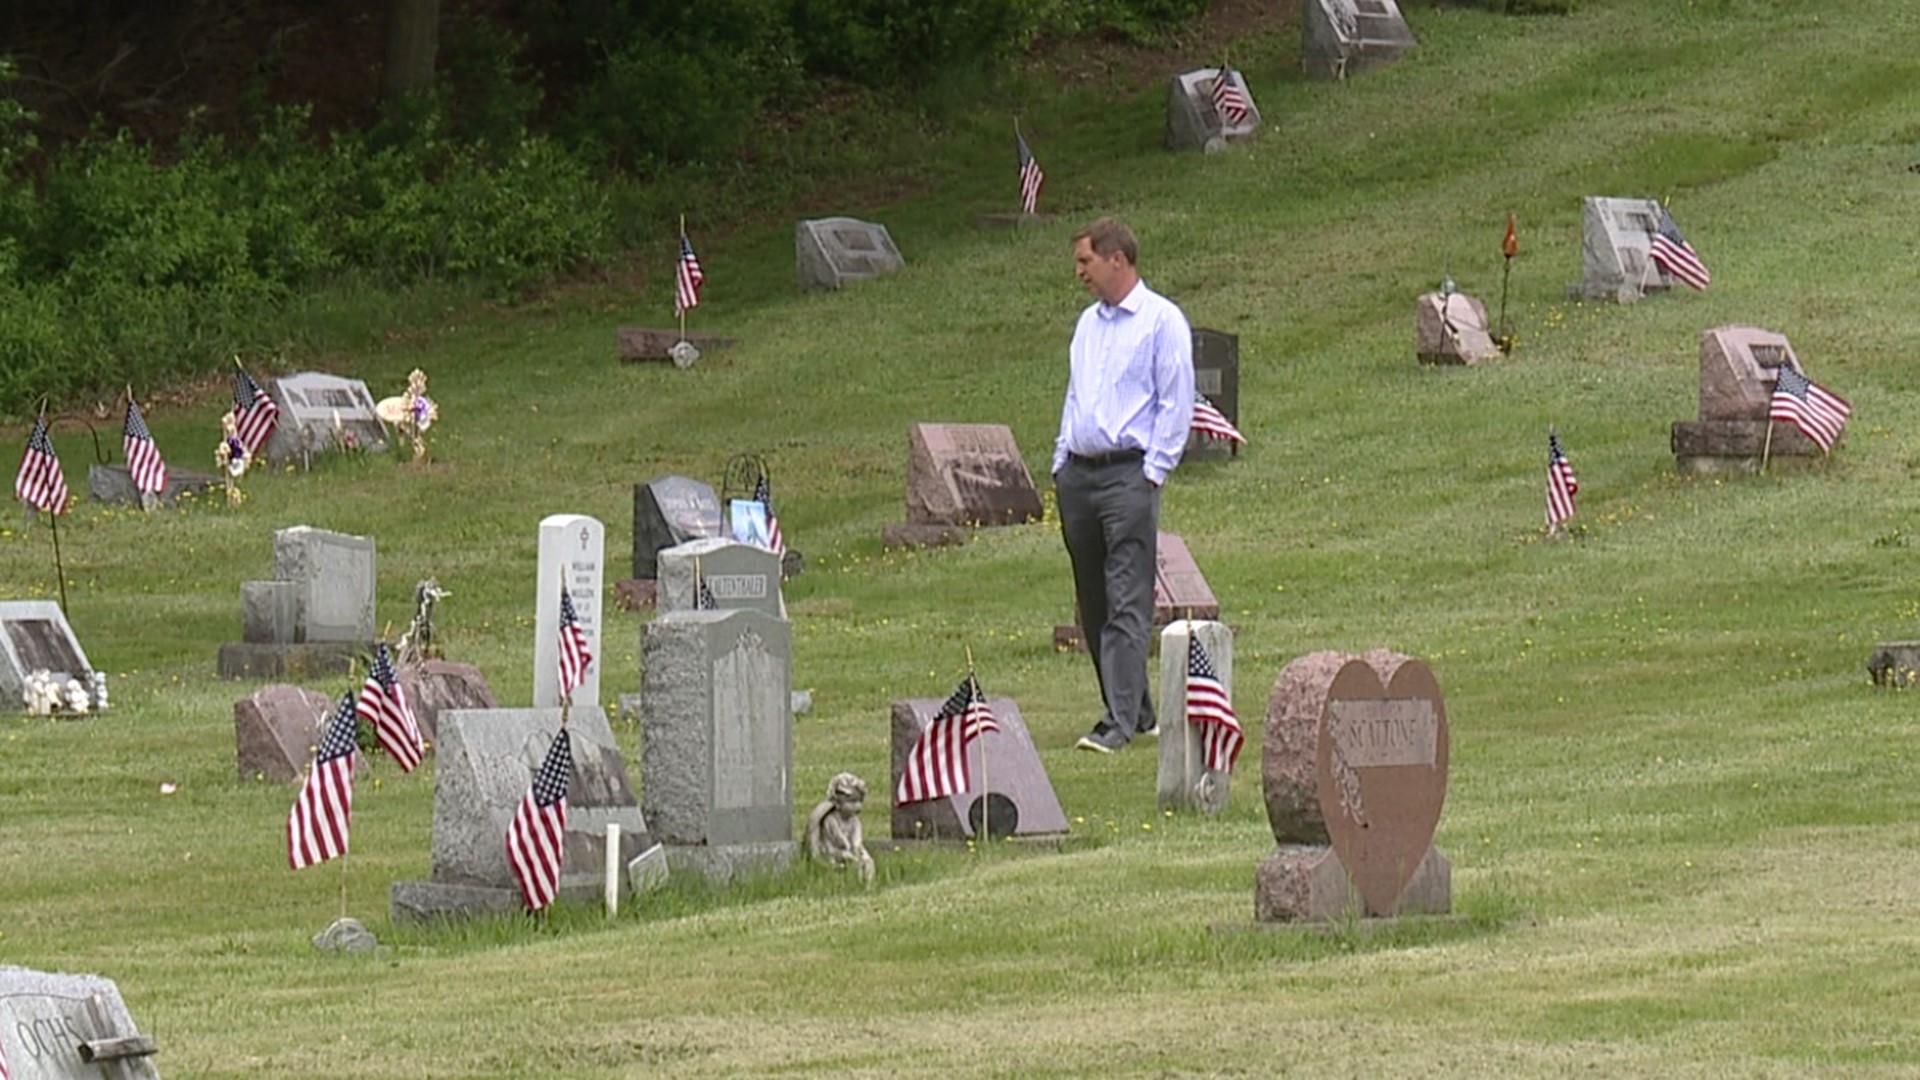 Jon Meyer says a walk through a cemetery, especially before Memorial Day, can be a powerful experience.